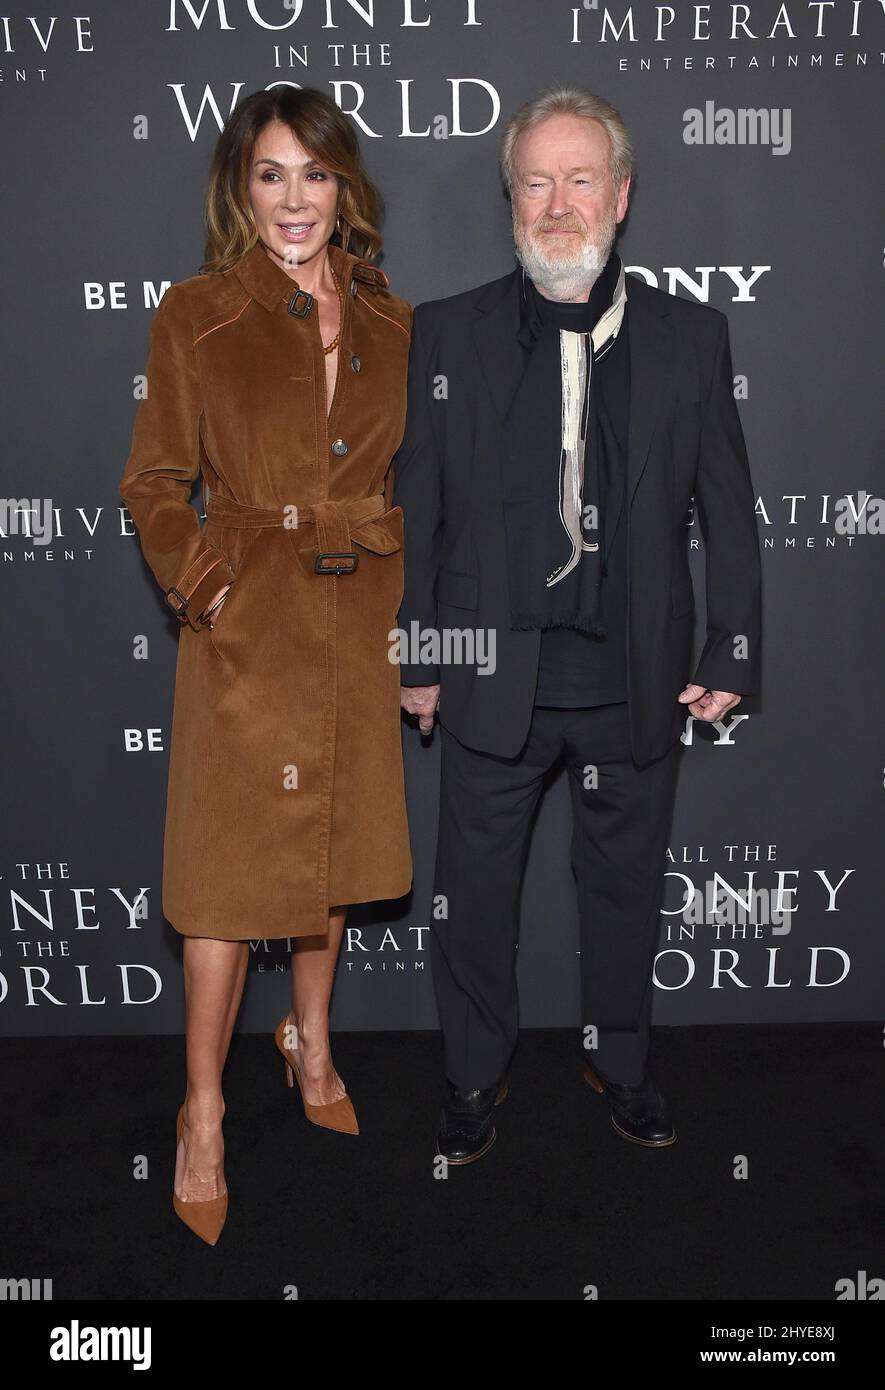 Ridley Scott and Giannina Facio attending the World premiere of All The Money In The World in Los Angeles, California Stock Photo